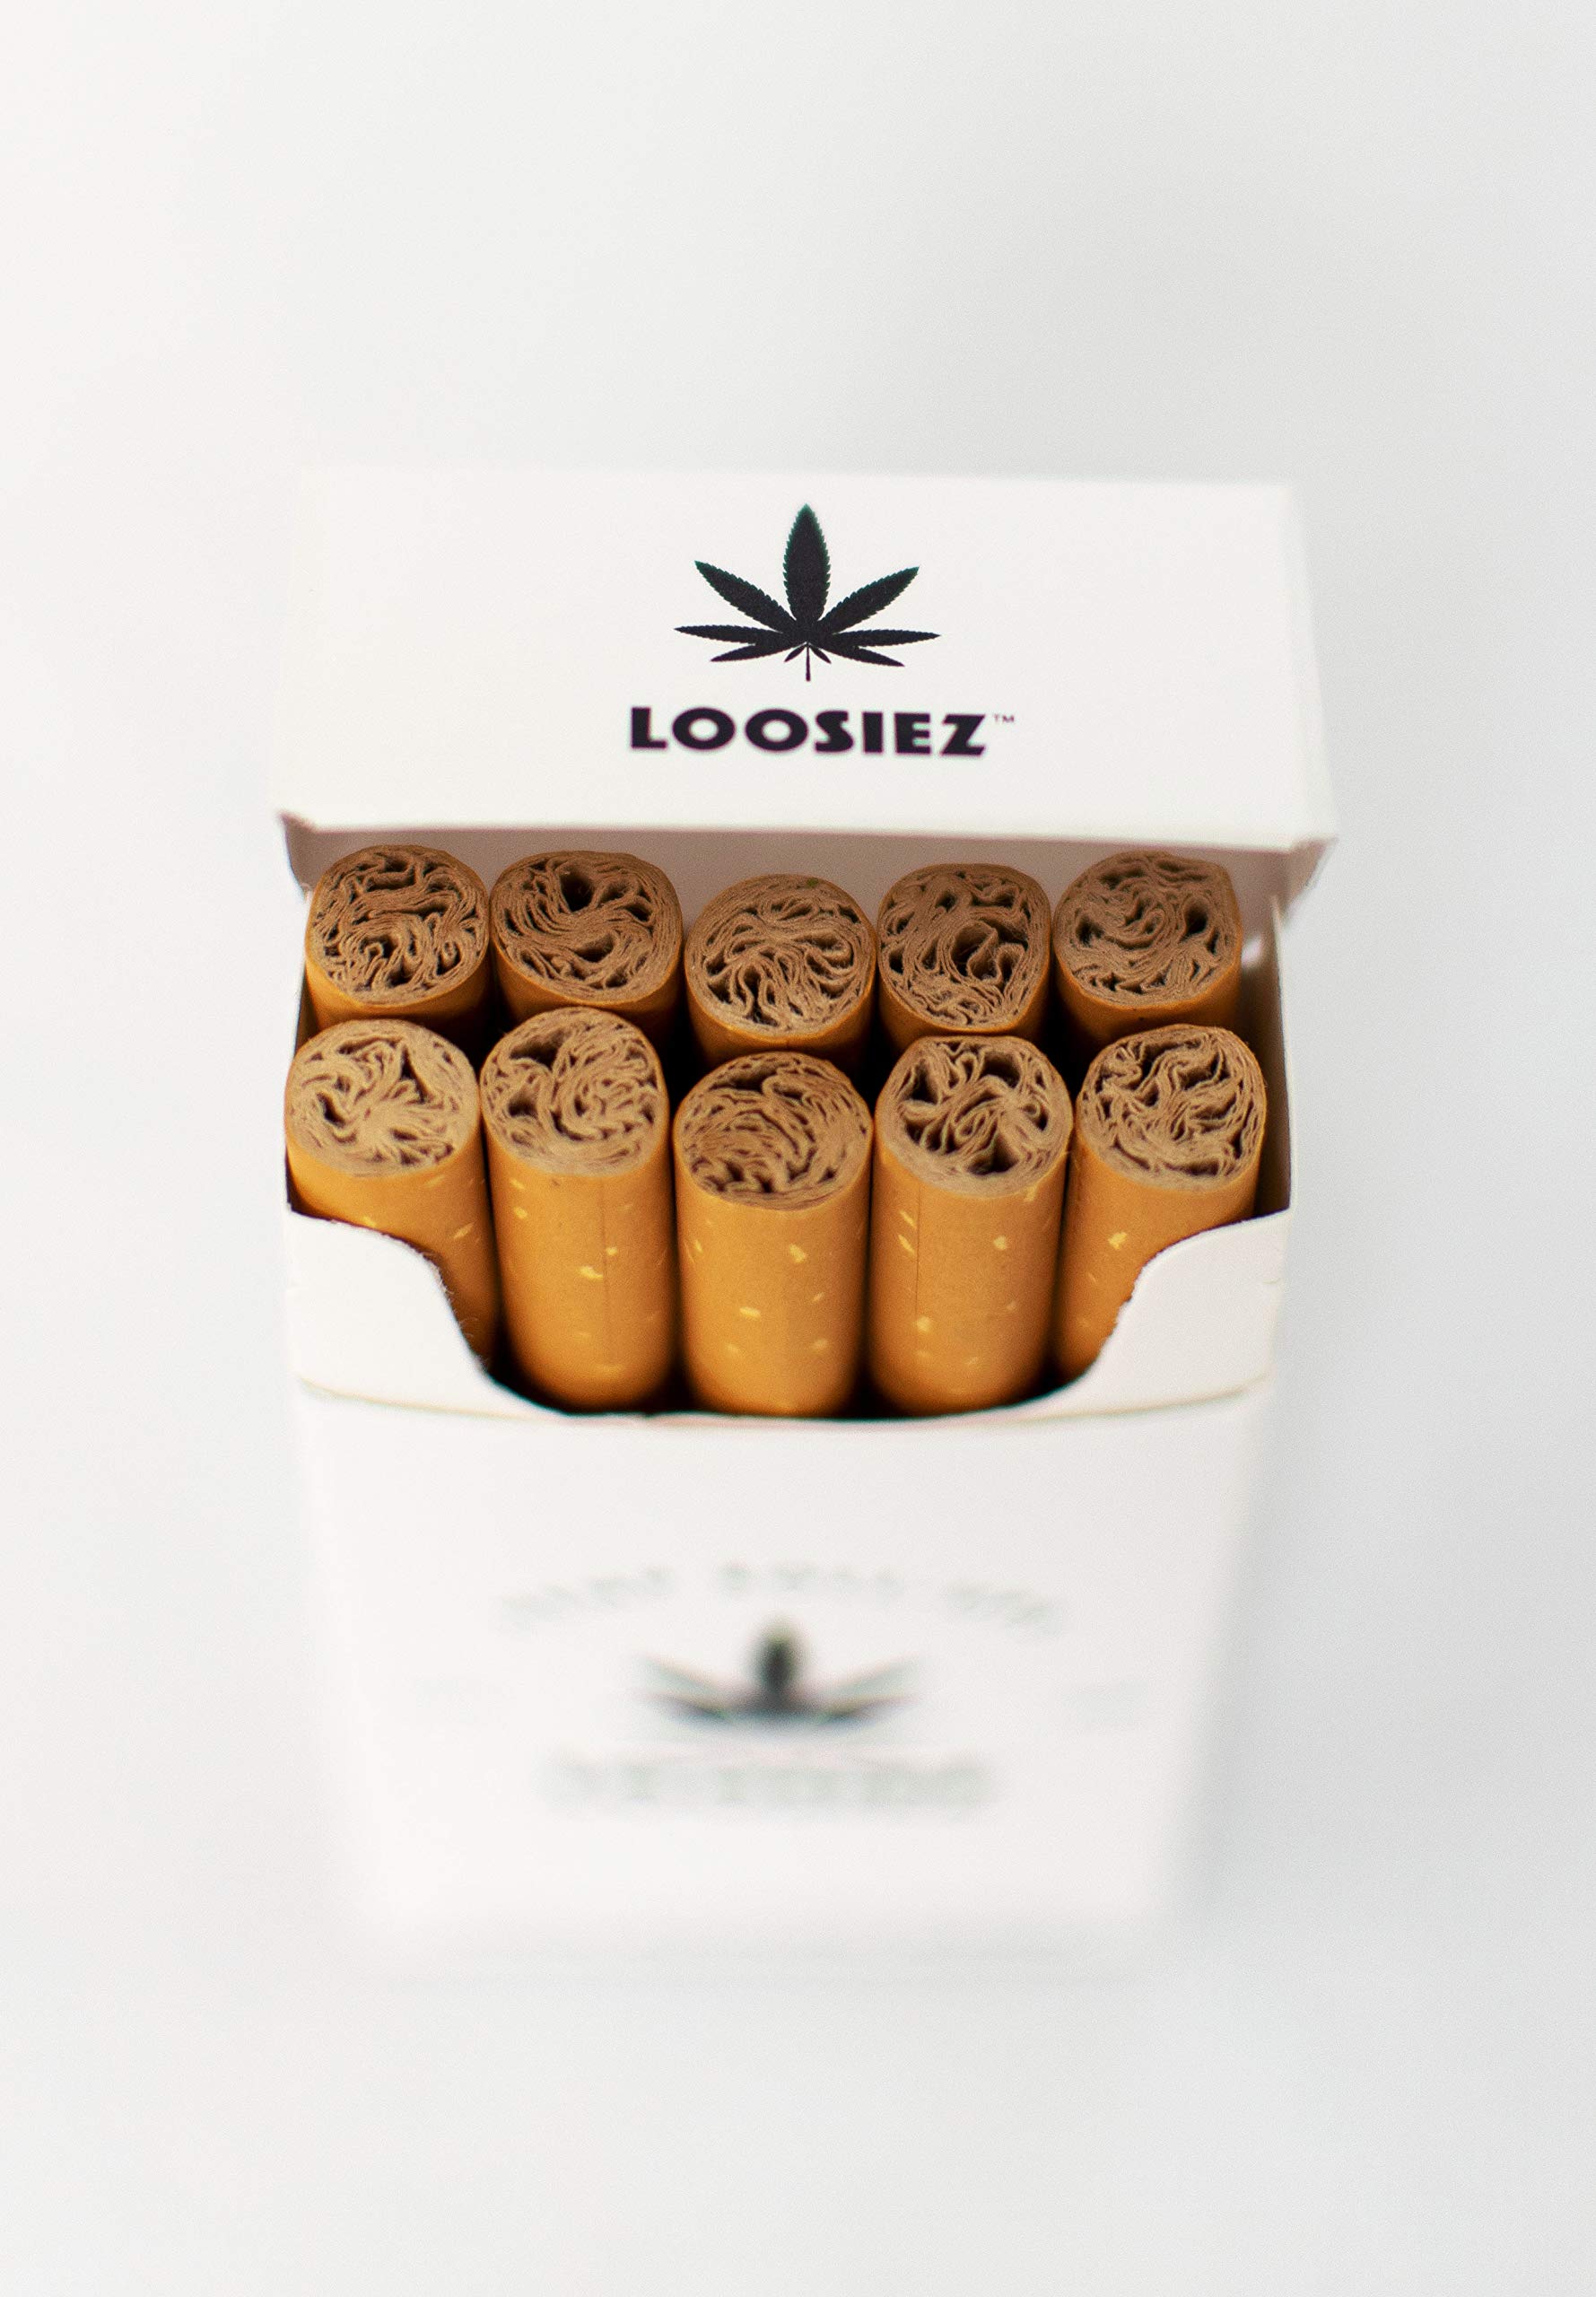 LOOSIEZ Roll-Ups - Herbal Cigarettes - 2 Packs - Made in USA